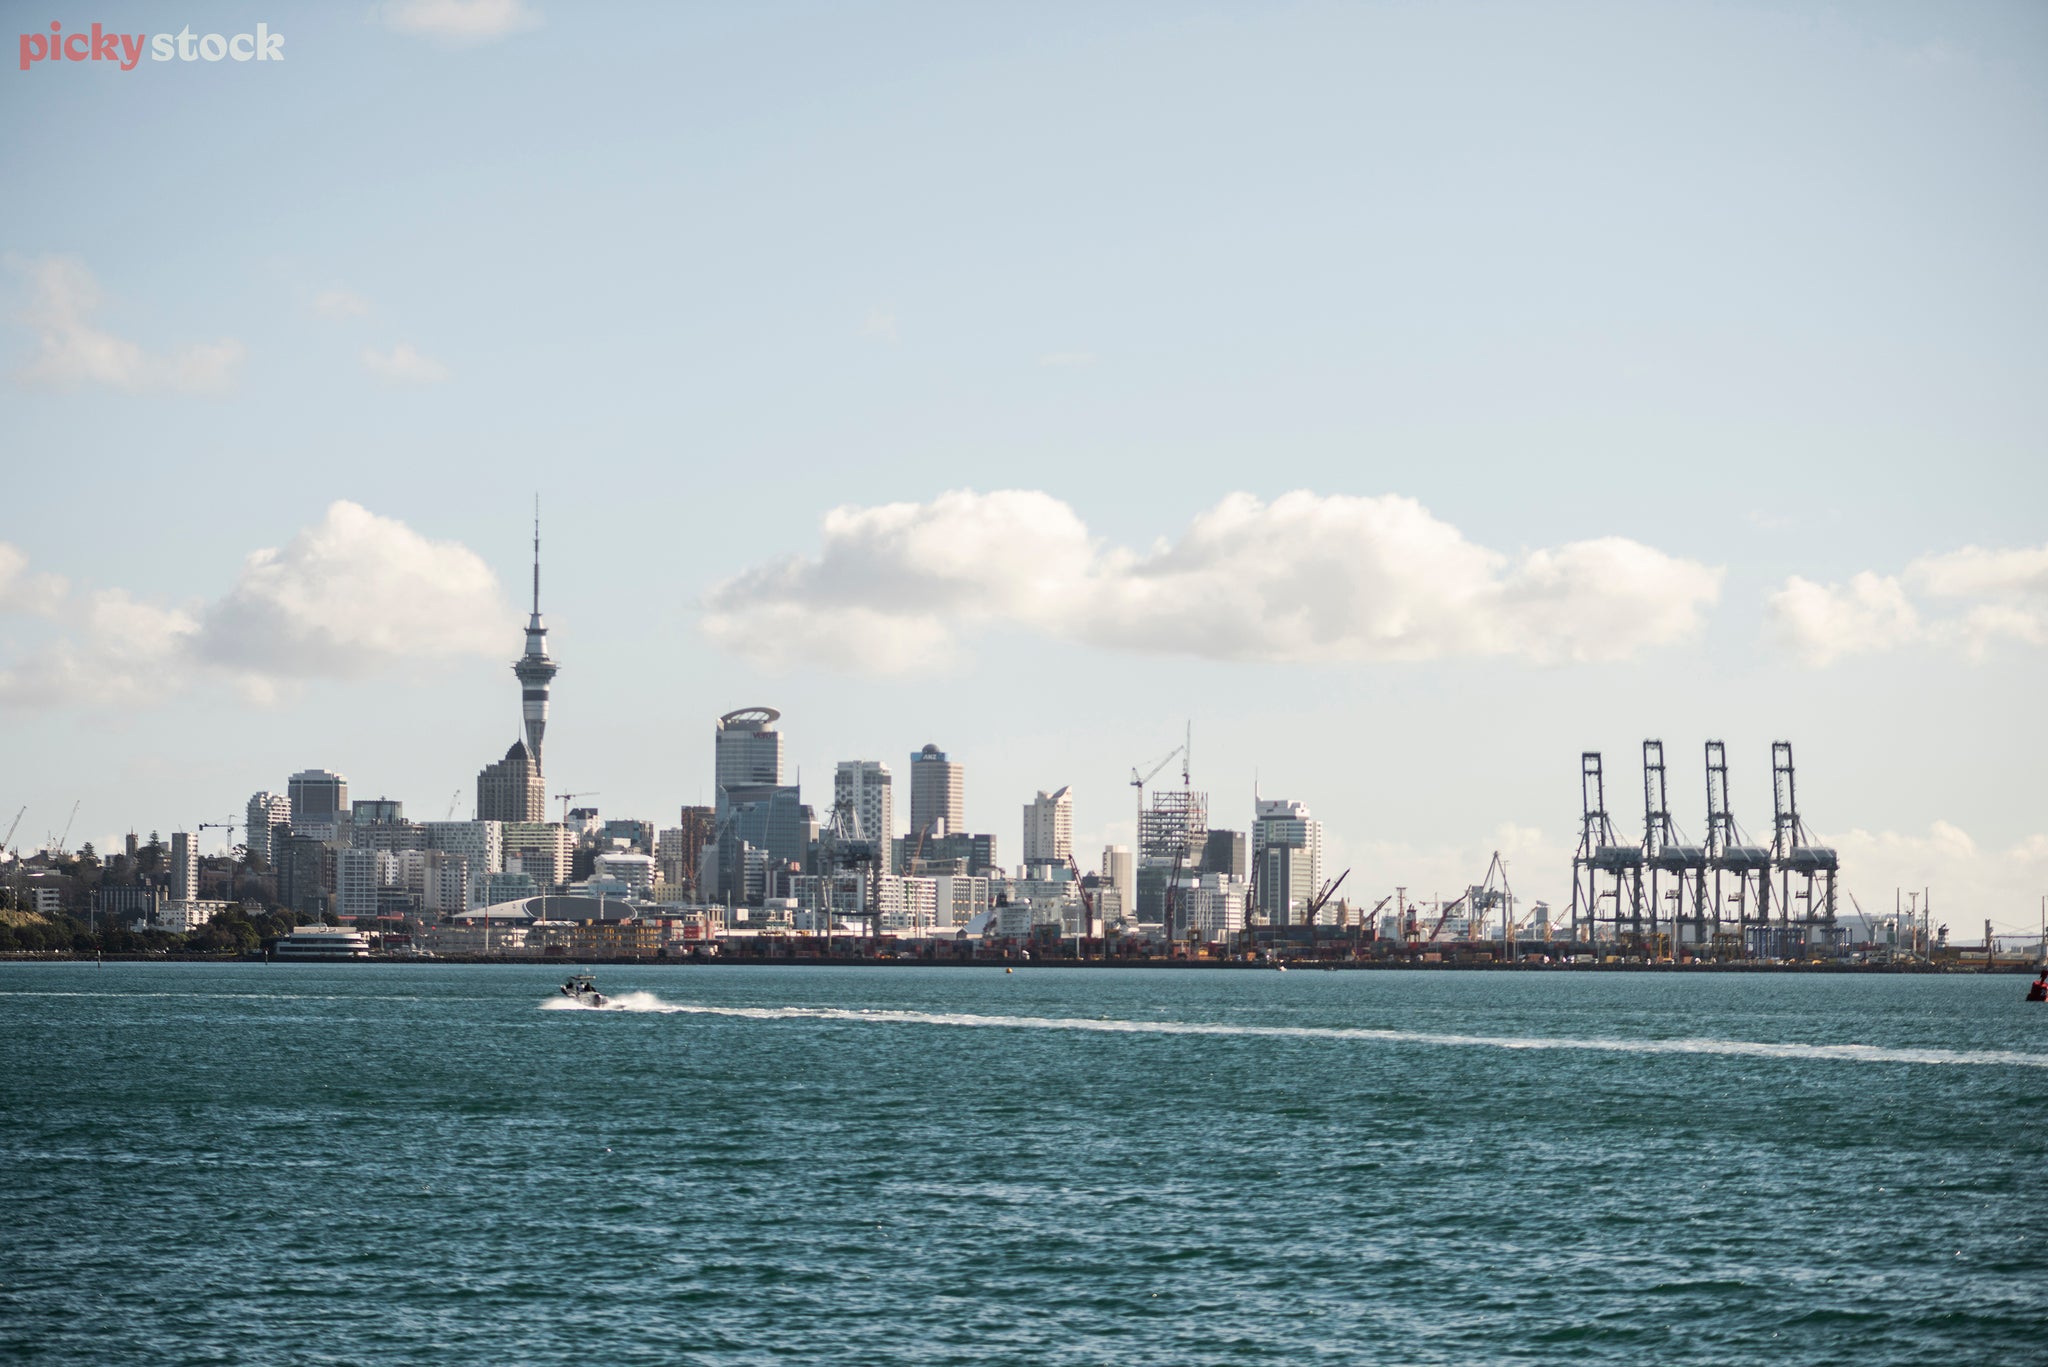 A light blue sky fades to white at the horizon. Small clouds float across. The cities skyline reaches up into the sky. On the left the sky tower, tall and thin extends highest. On the right a port filled with containers and cranes it's darker than the city. The city and port sit on the harbour, a blue body of water which fills down to the foreground. from right to left a small boat is motoring, leaving a white wake churned in its path.